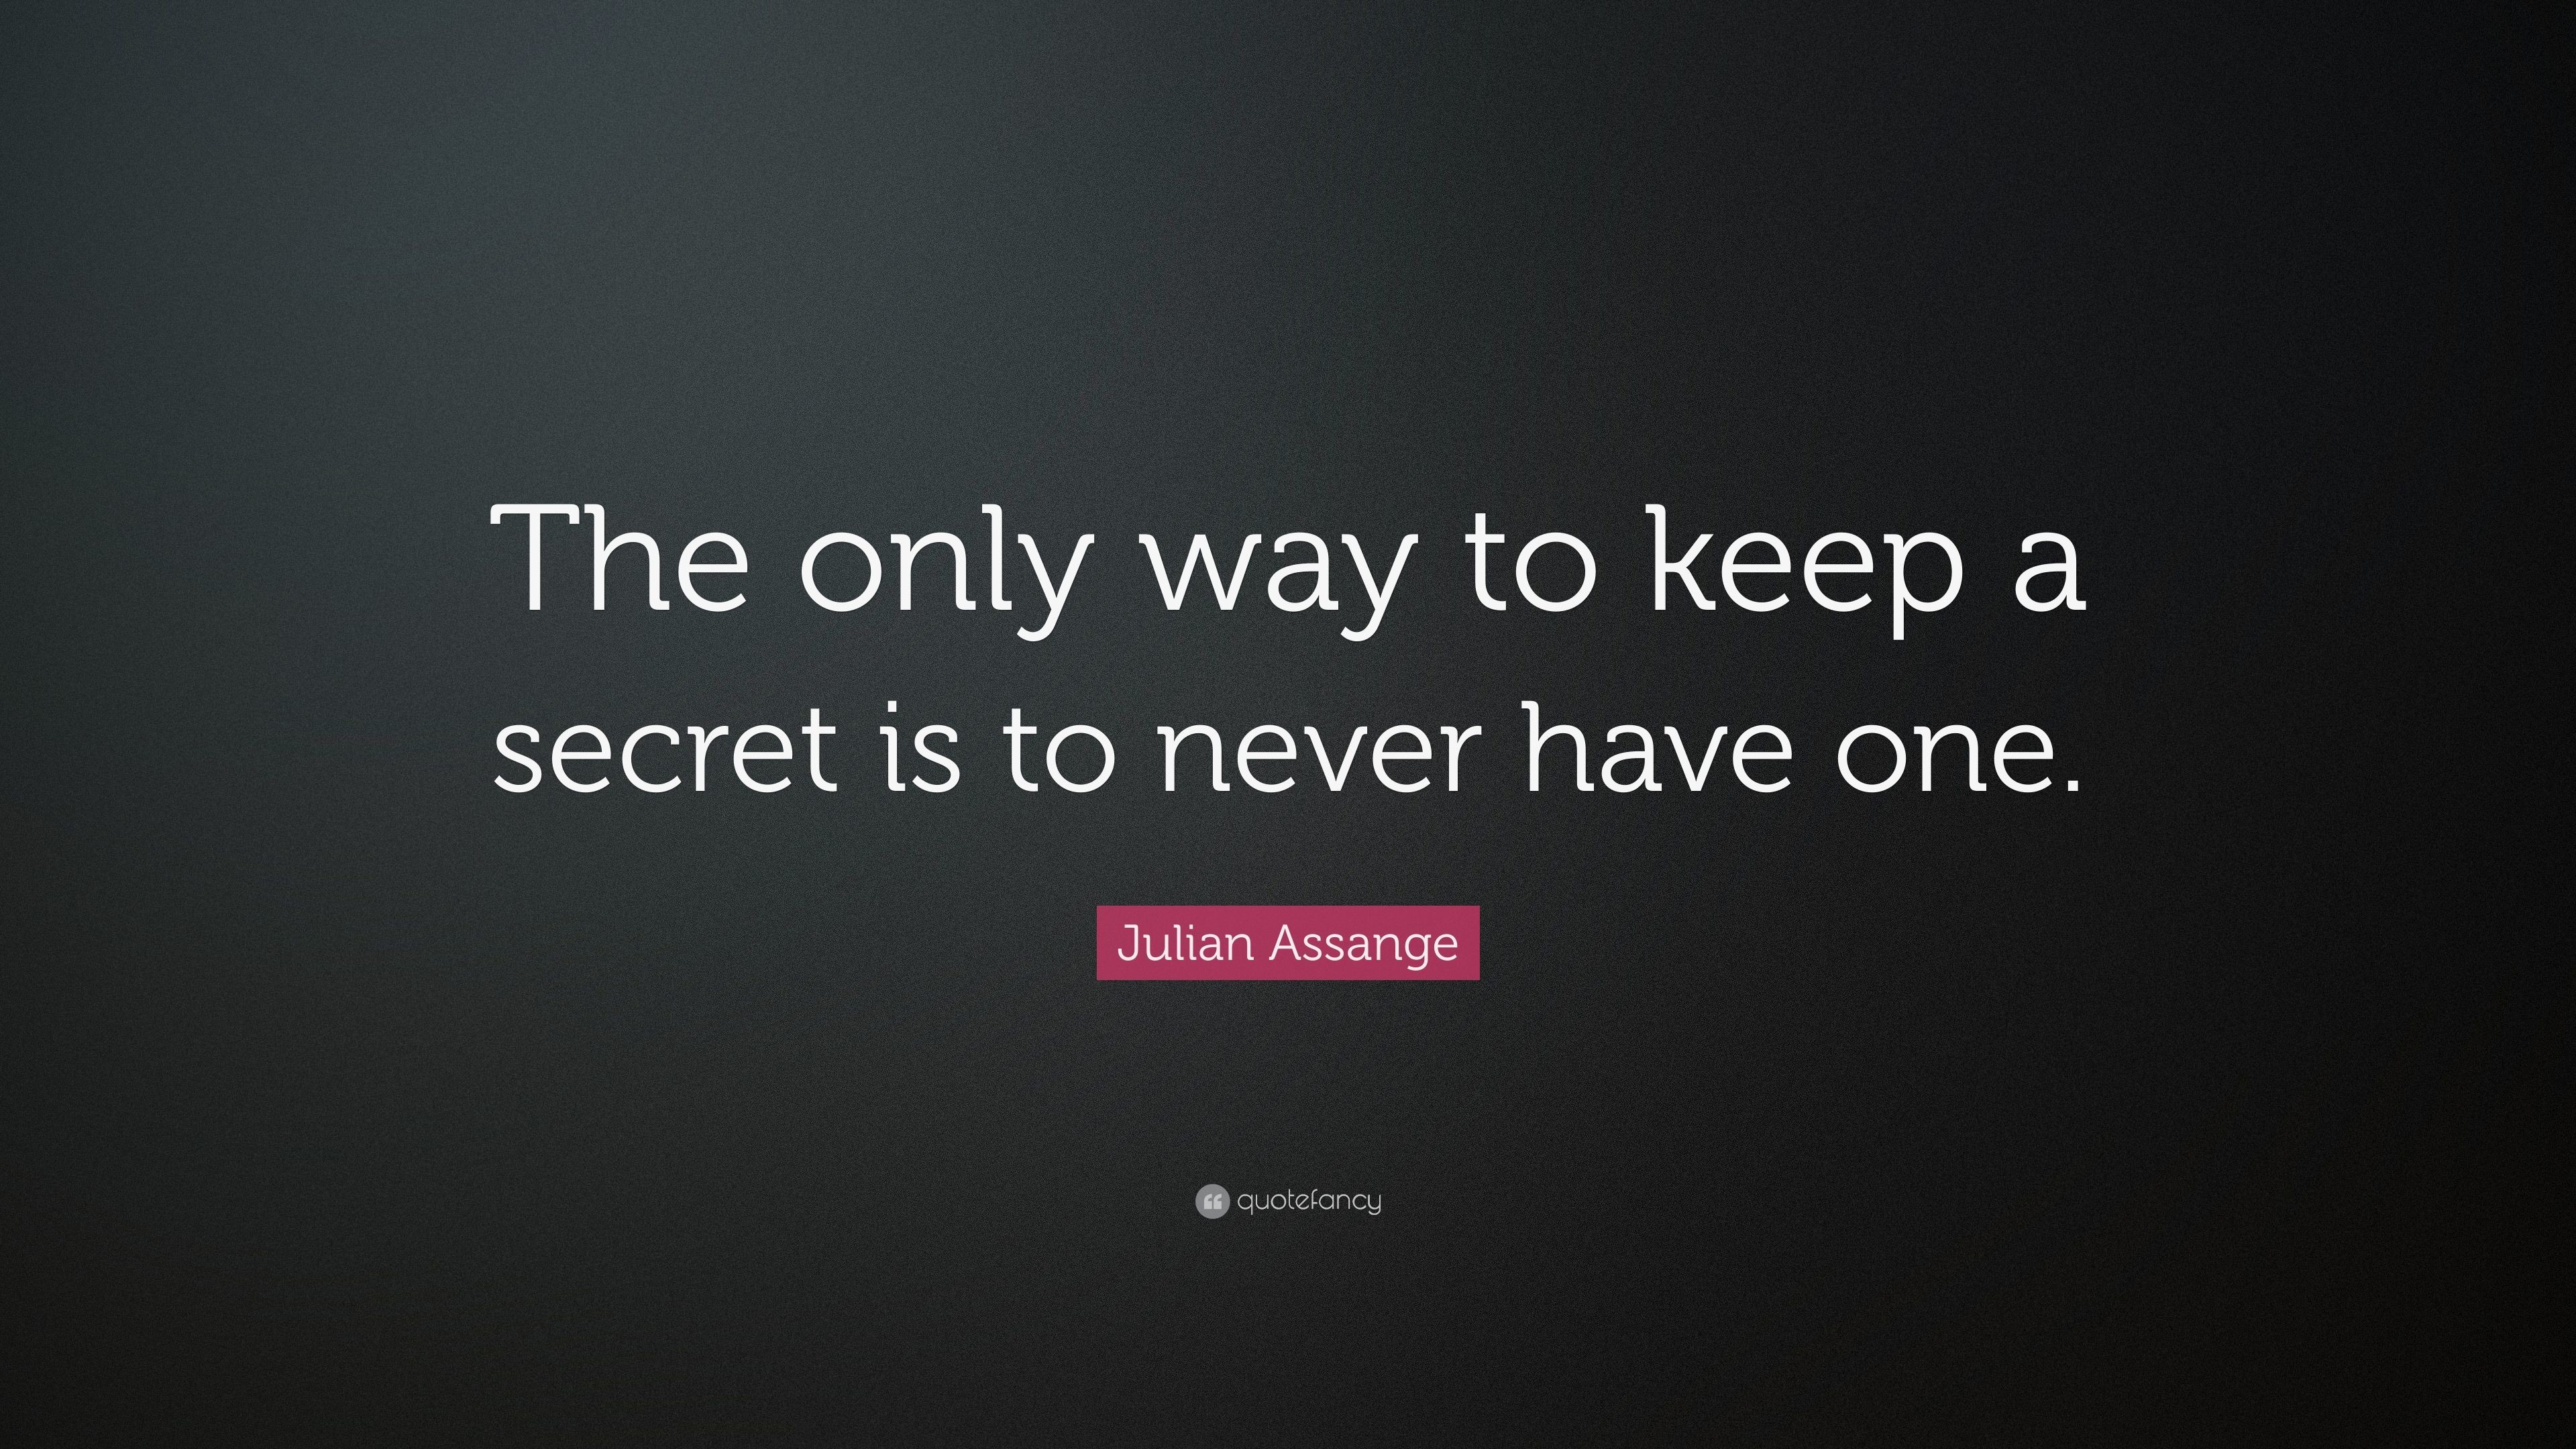 3840x2160 Julian Assange Quote: “The only way to keep a secret is to never have